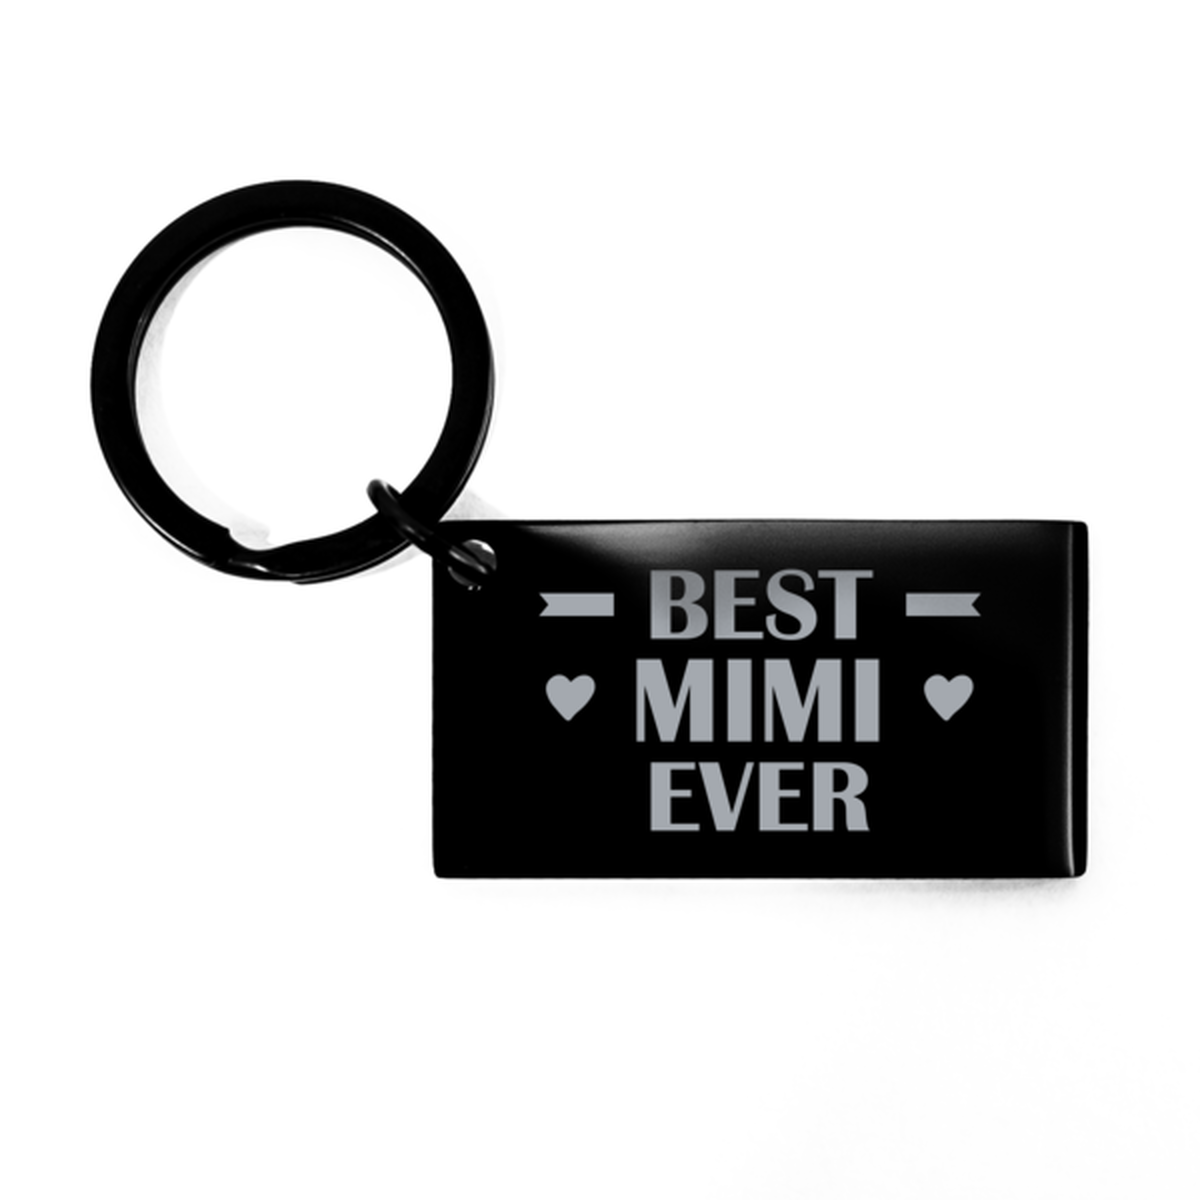 Best Mimi Ever Mimi Gifts, Funny Black Keychain For Mimi, Birthday Engraved Keyring Presents For Women